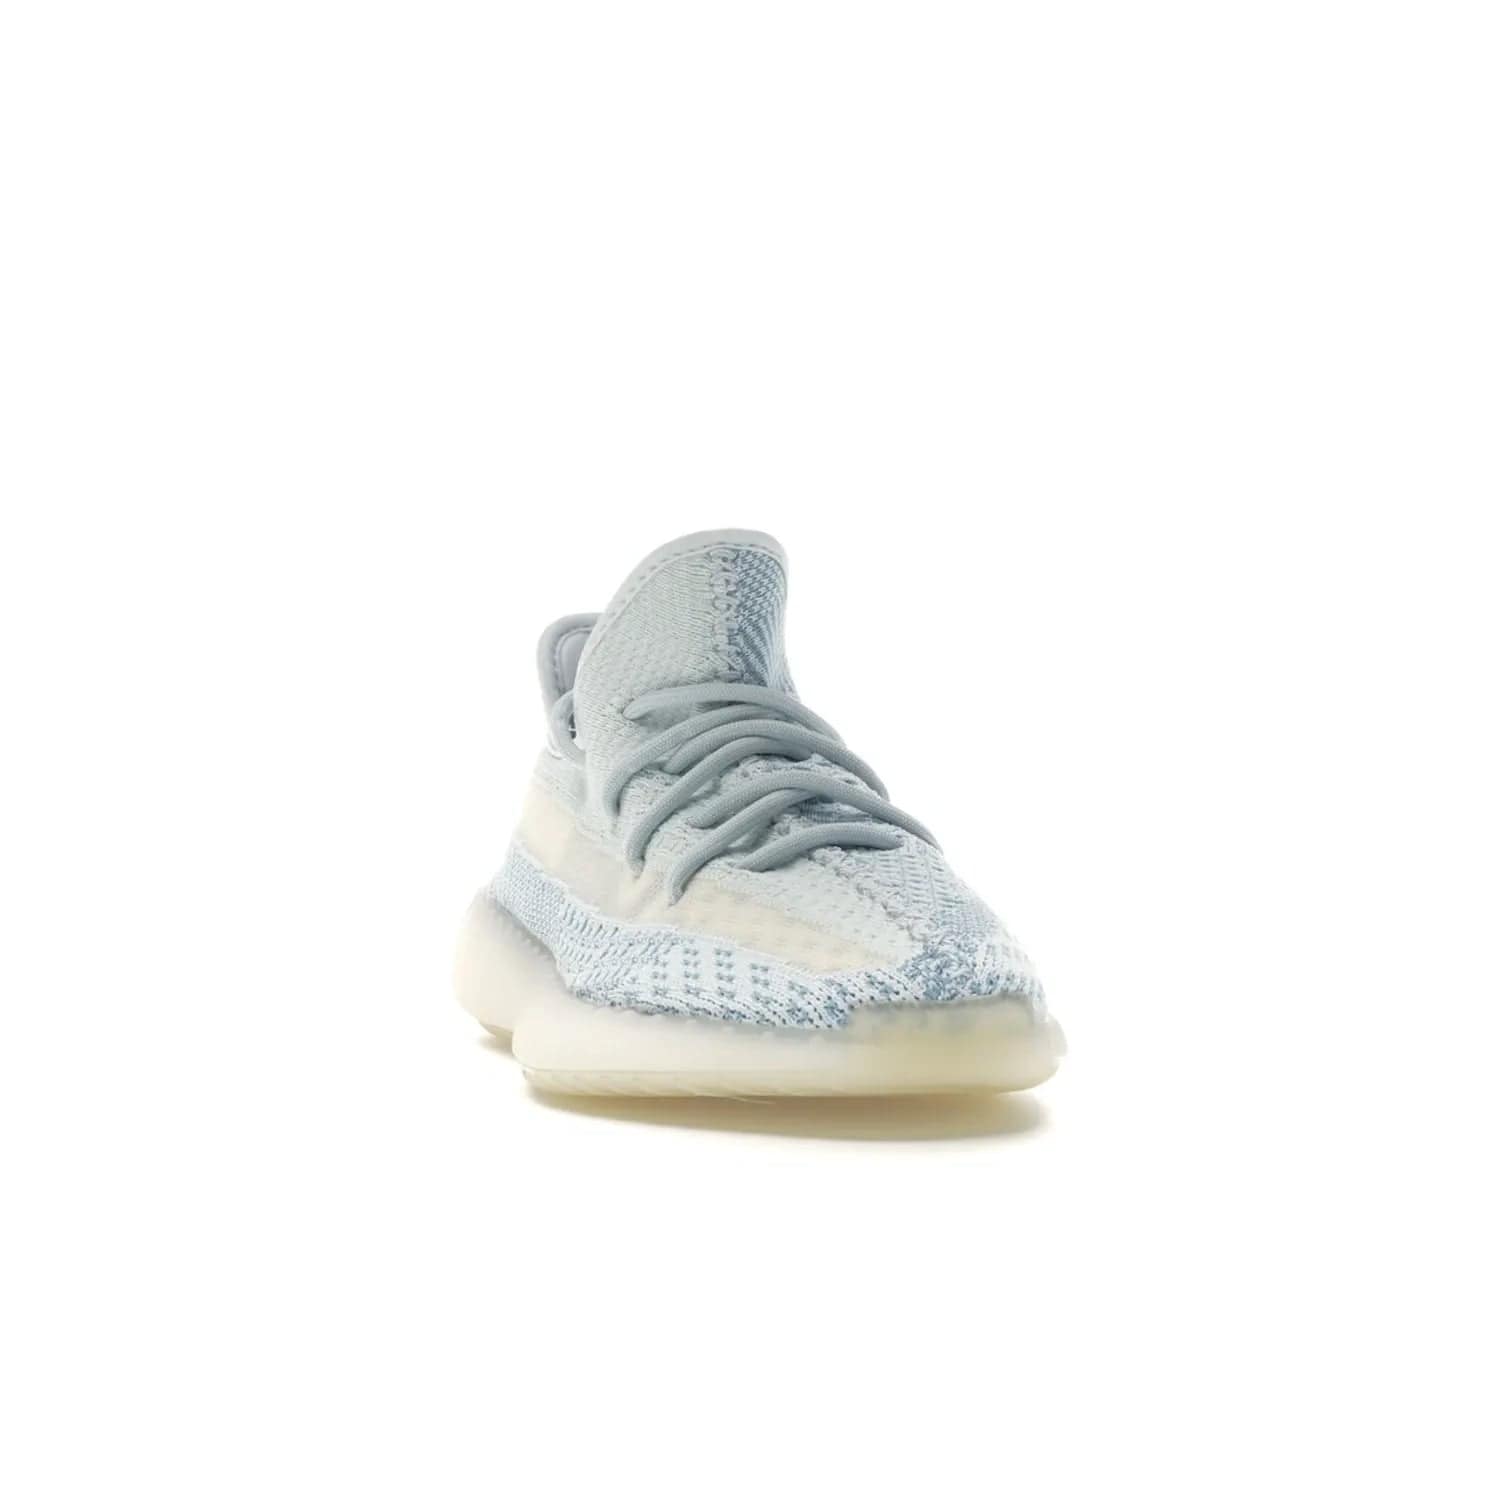 adidas Yeezy Boost 350 V2 Cloud White (Non-Reflective) - Image 8 - Only at www.BallersClubKickz.com - Uniquely designed adidas Yeezy Boost 350 V2 Cloud White (Non-Reflective) with a Primeknit upper in shades of cream and blue with a contrasting hard sole. A fashion-forward sneaker with a transparent strip and blue-and-white patterns.